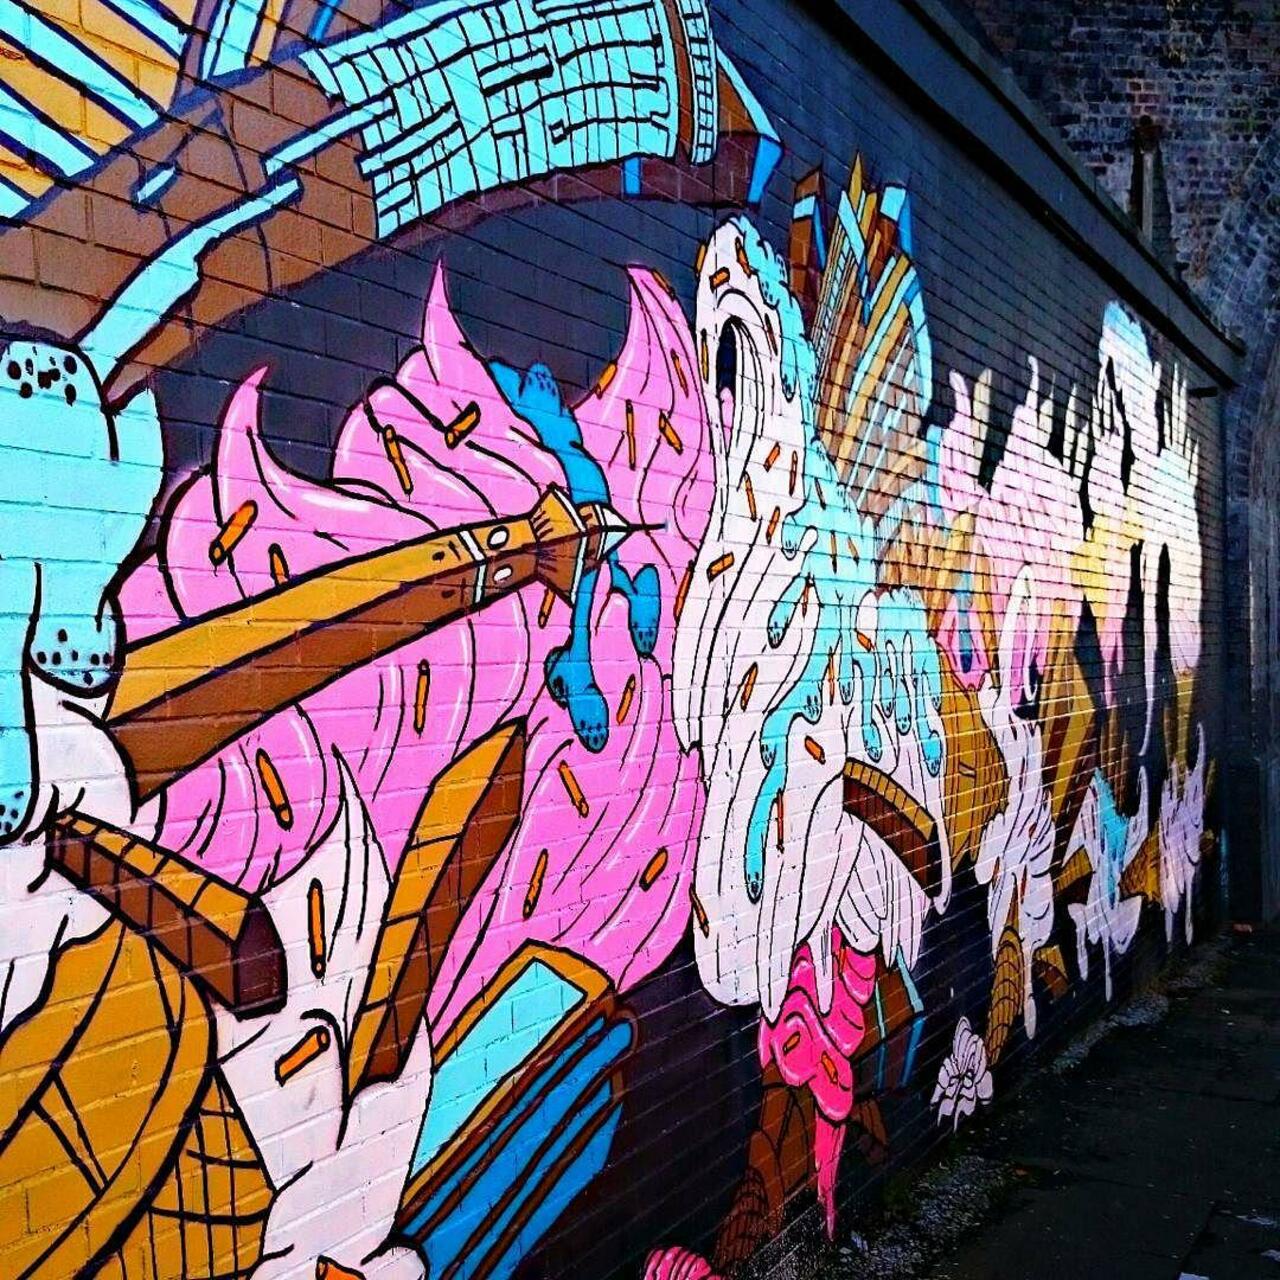 Took this picture a while back in Digbeth Birmingham. #GraffSpotting #PhotoGraff #Instagram #graffiti #streetart http://t.co/Vyv3wEE47n